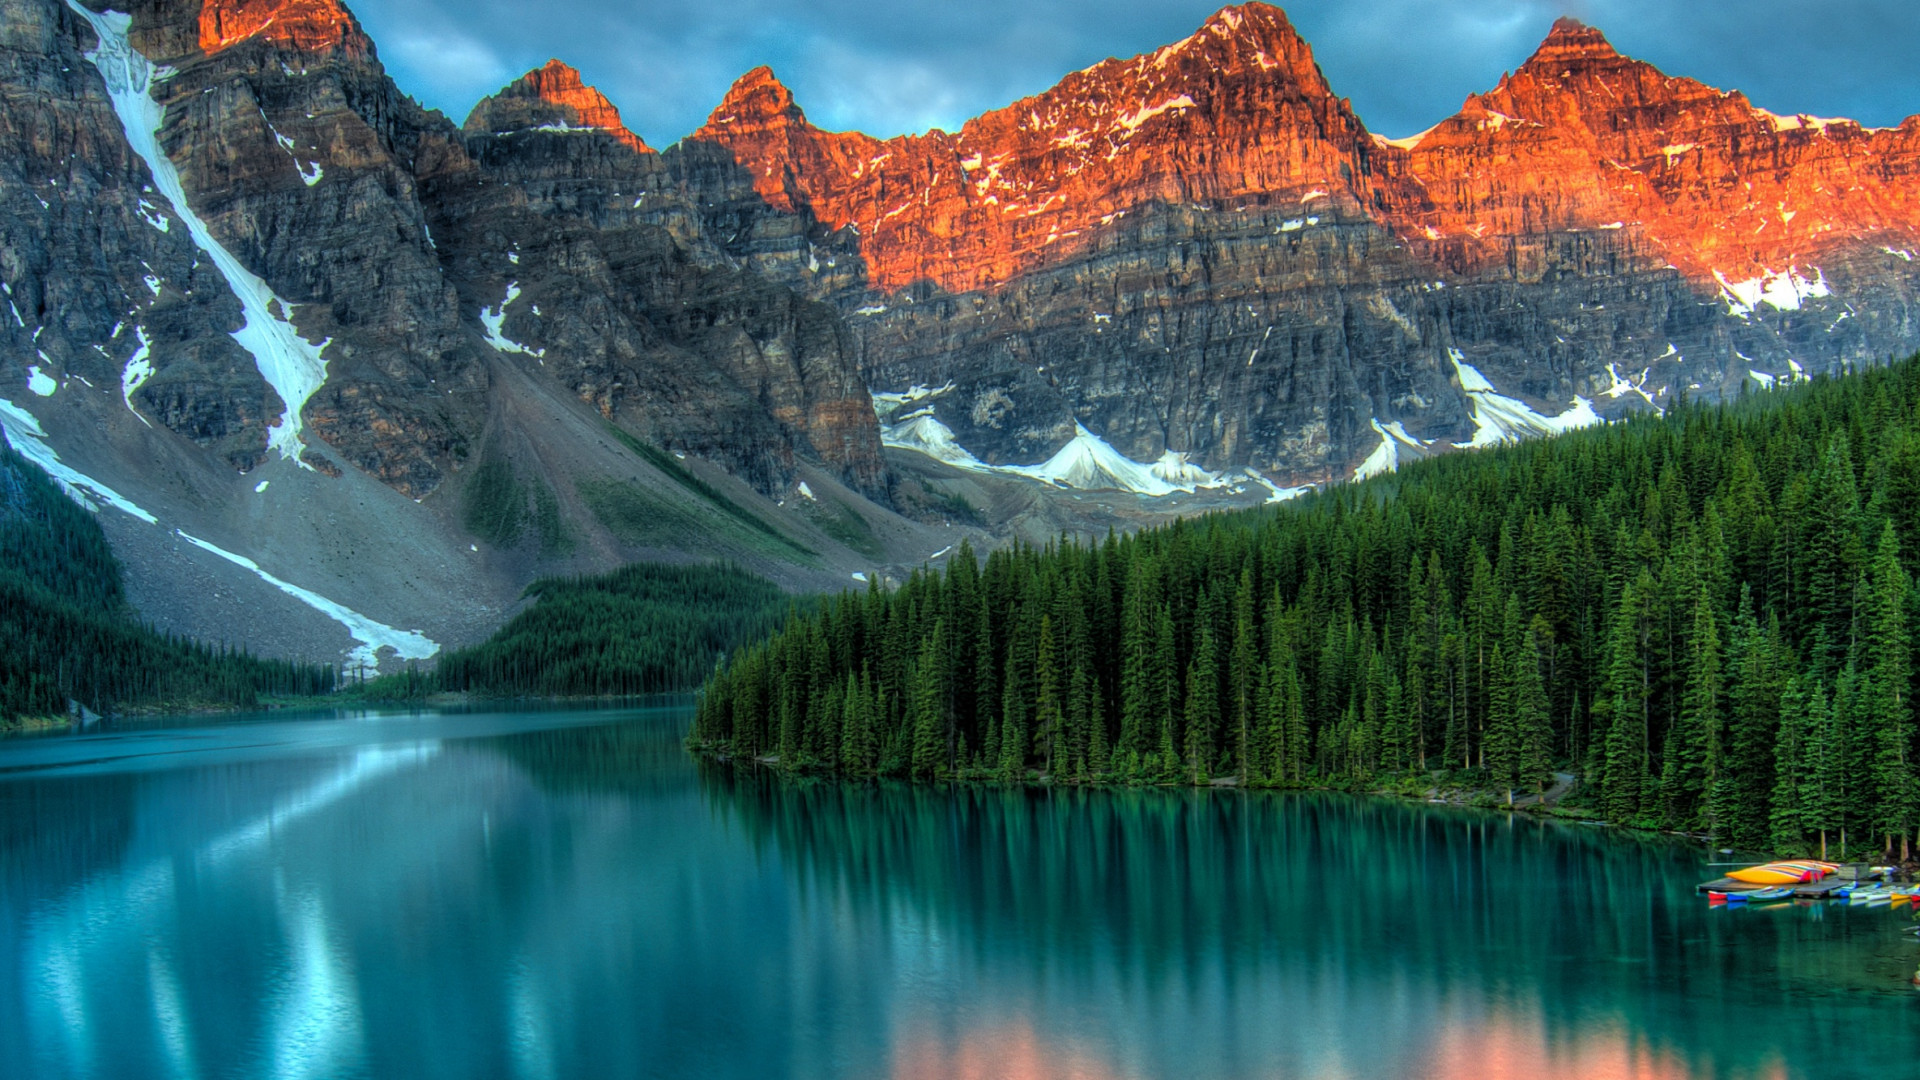  Wallpaper Moraine Lake Banff Canada mountains forest 